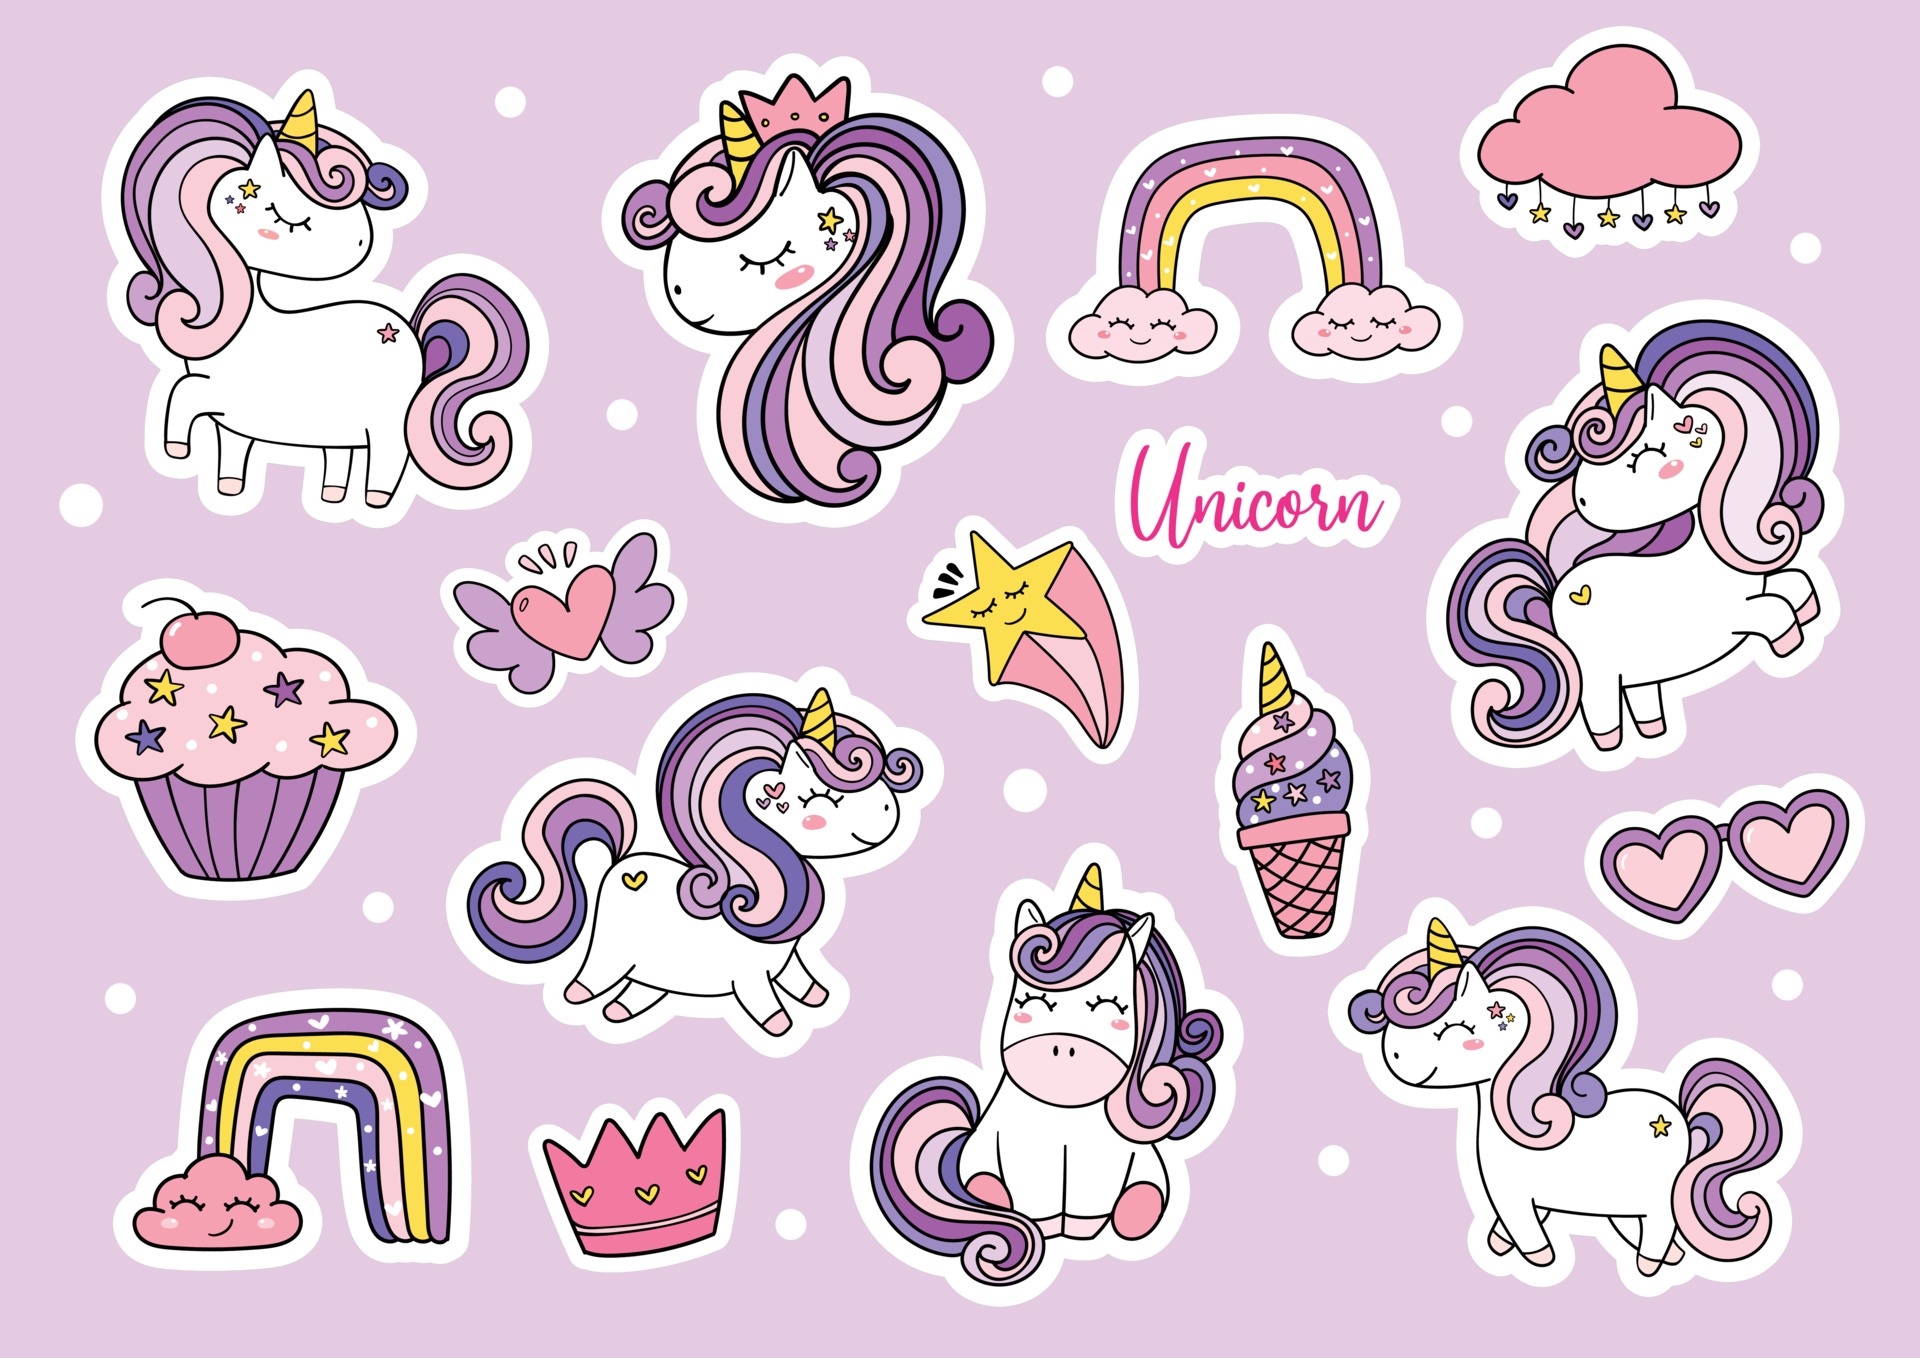 Cute stickers Vectors & Illustrations for Free Download